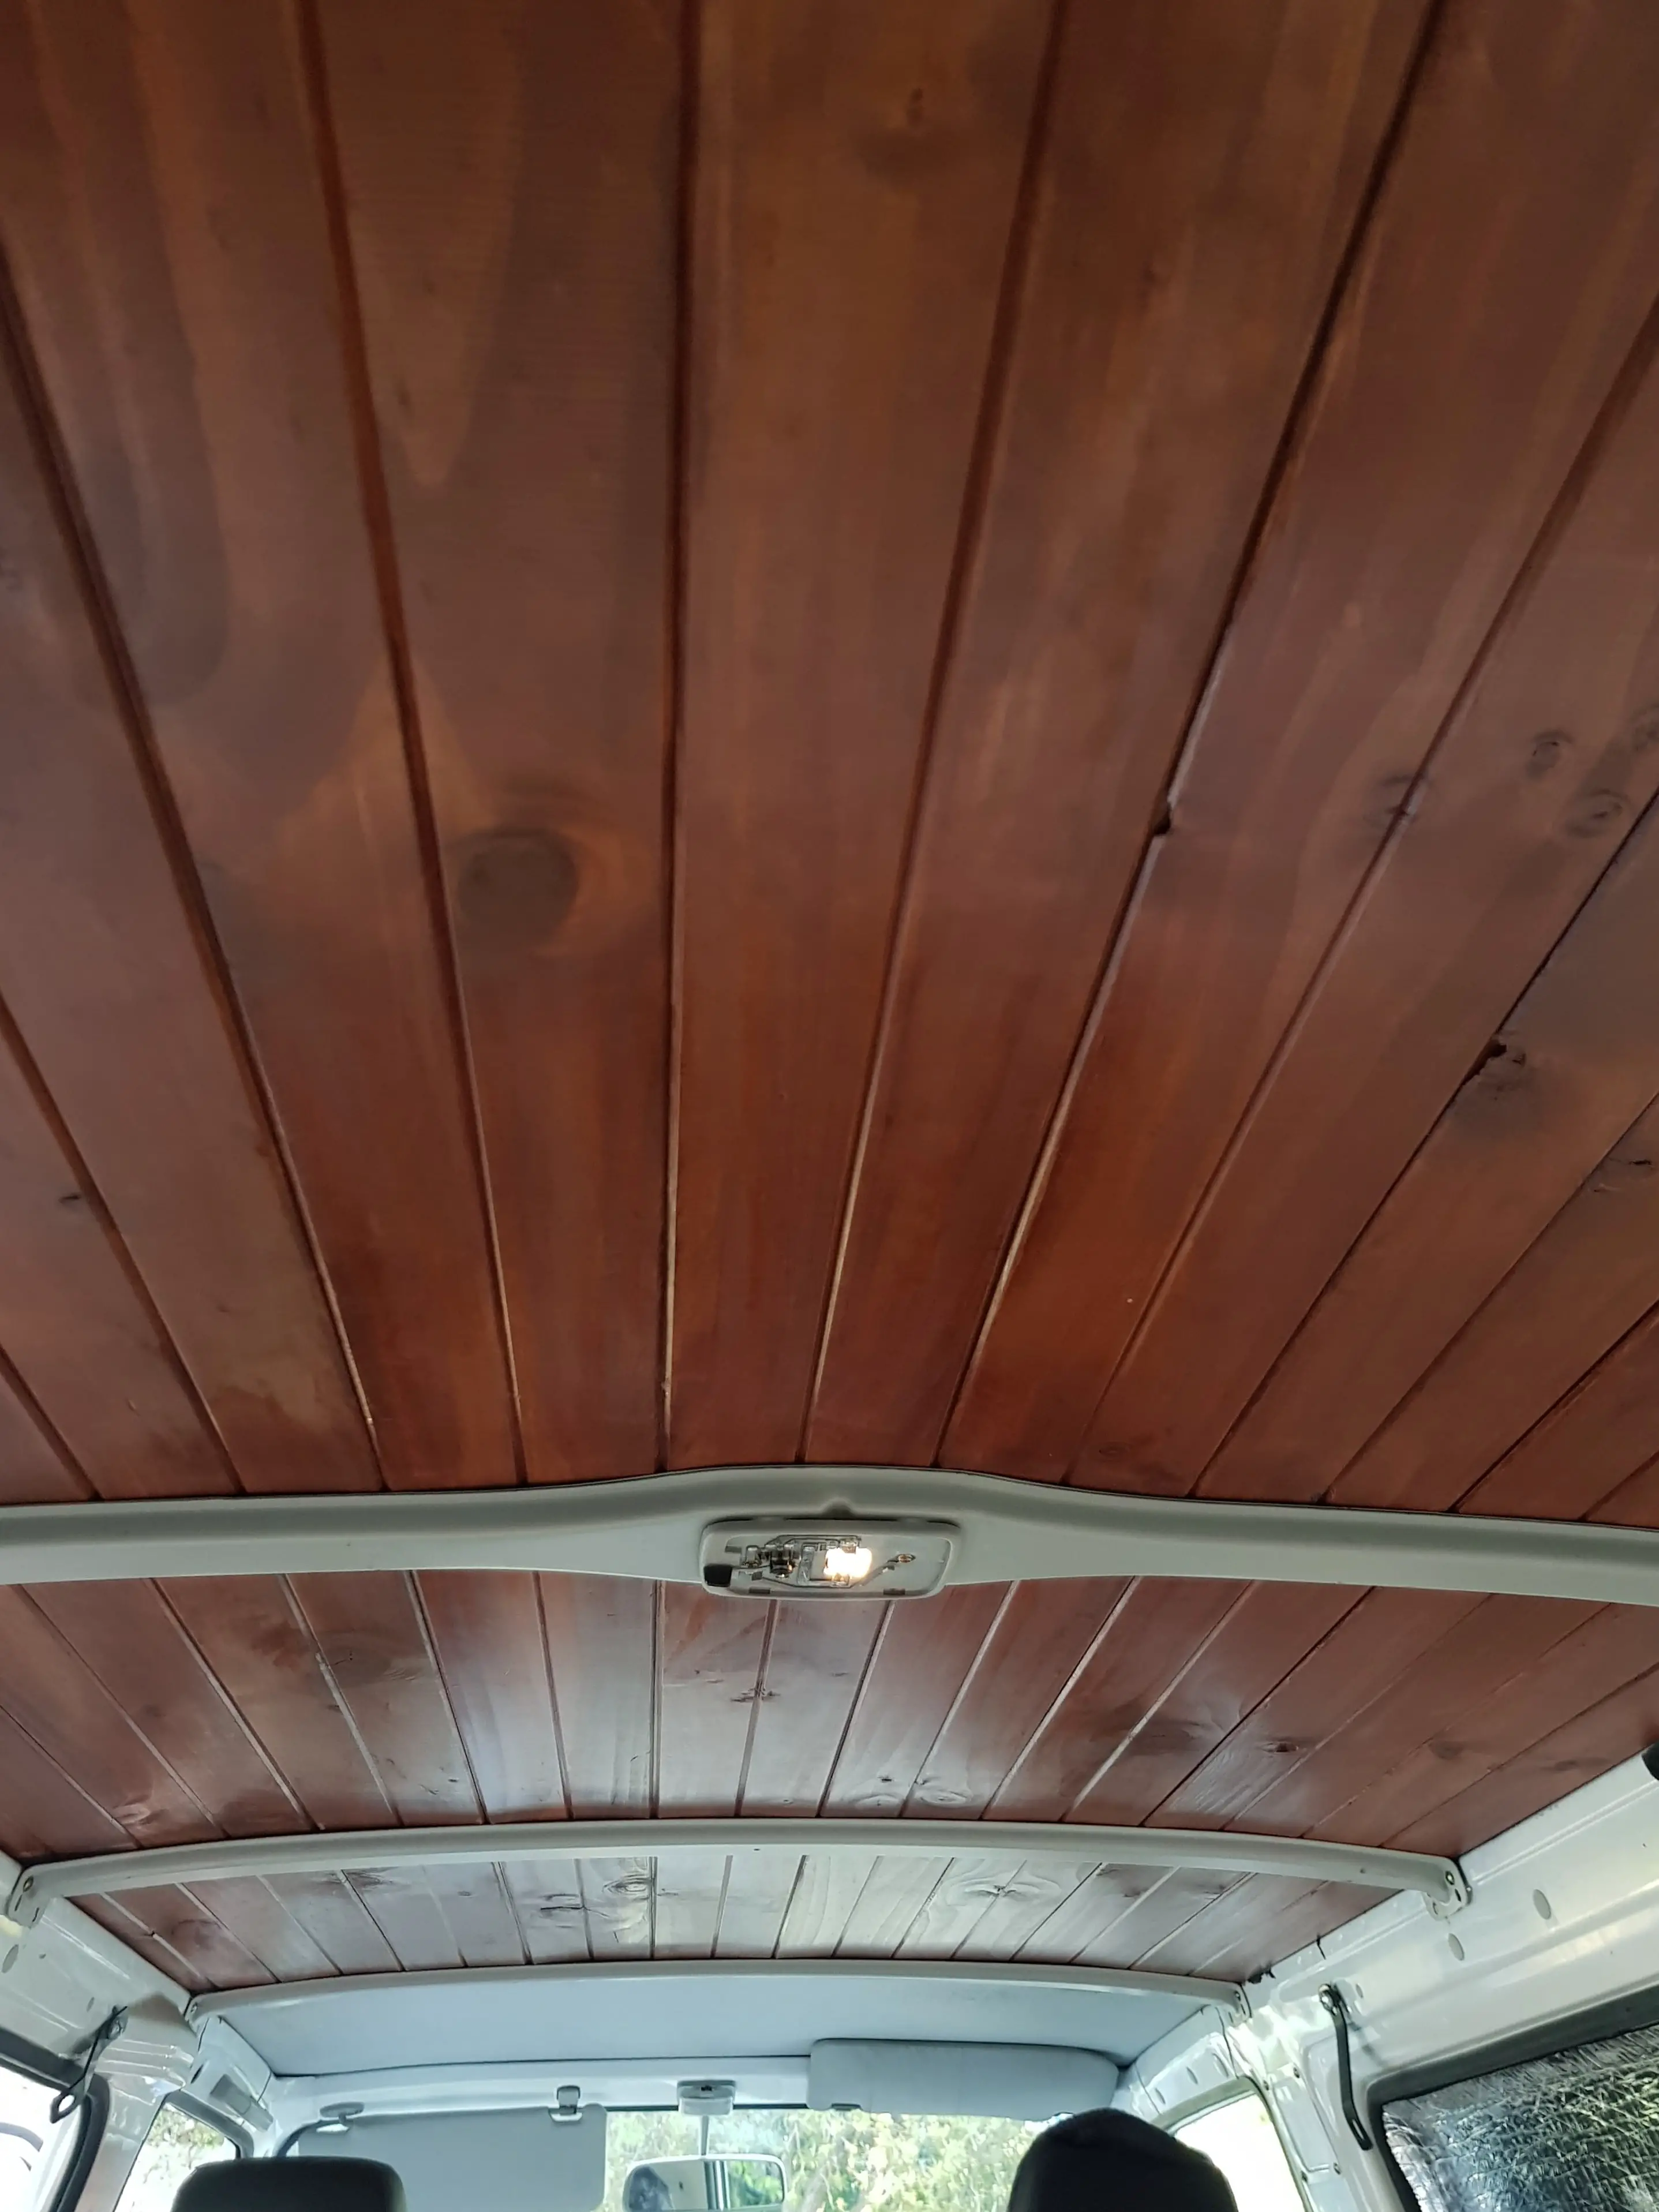 stained wooden ceiling in a camper van